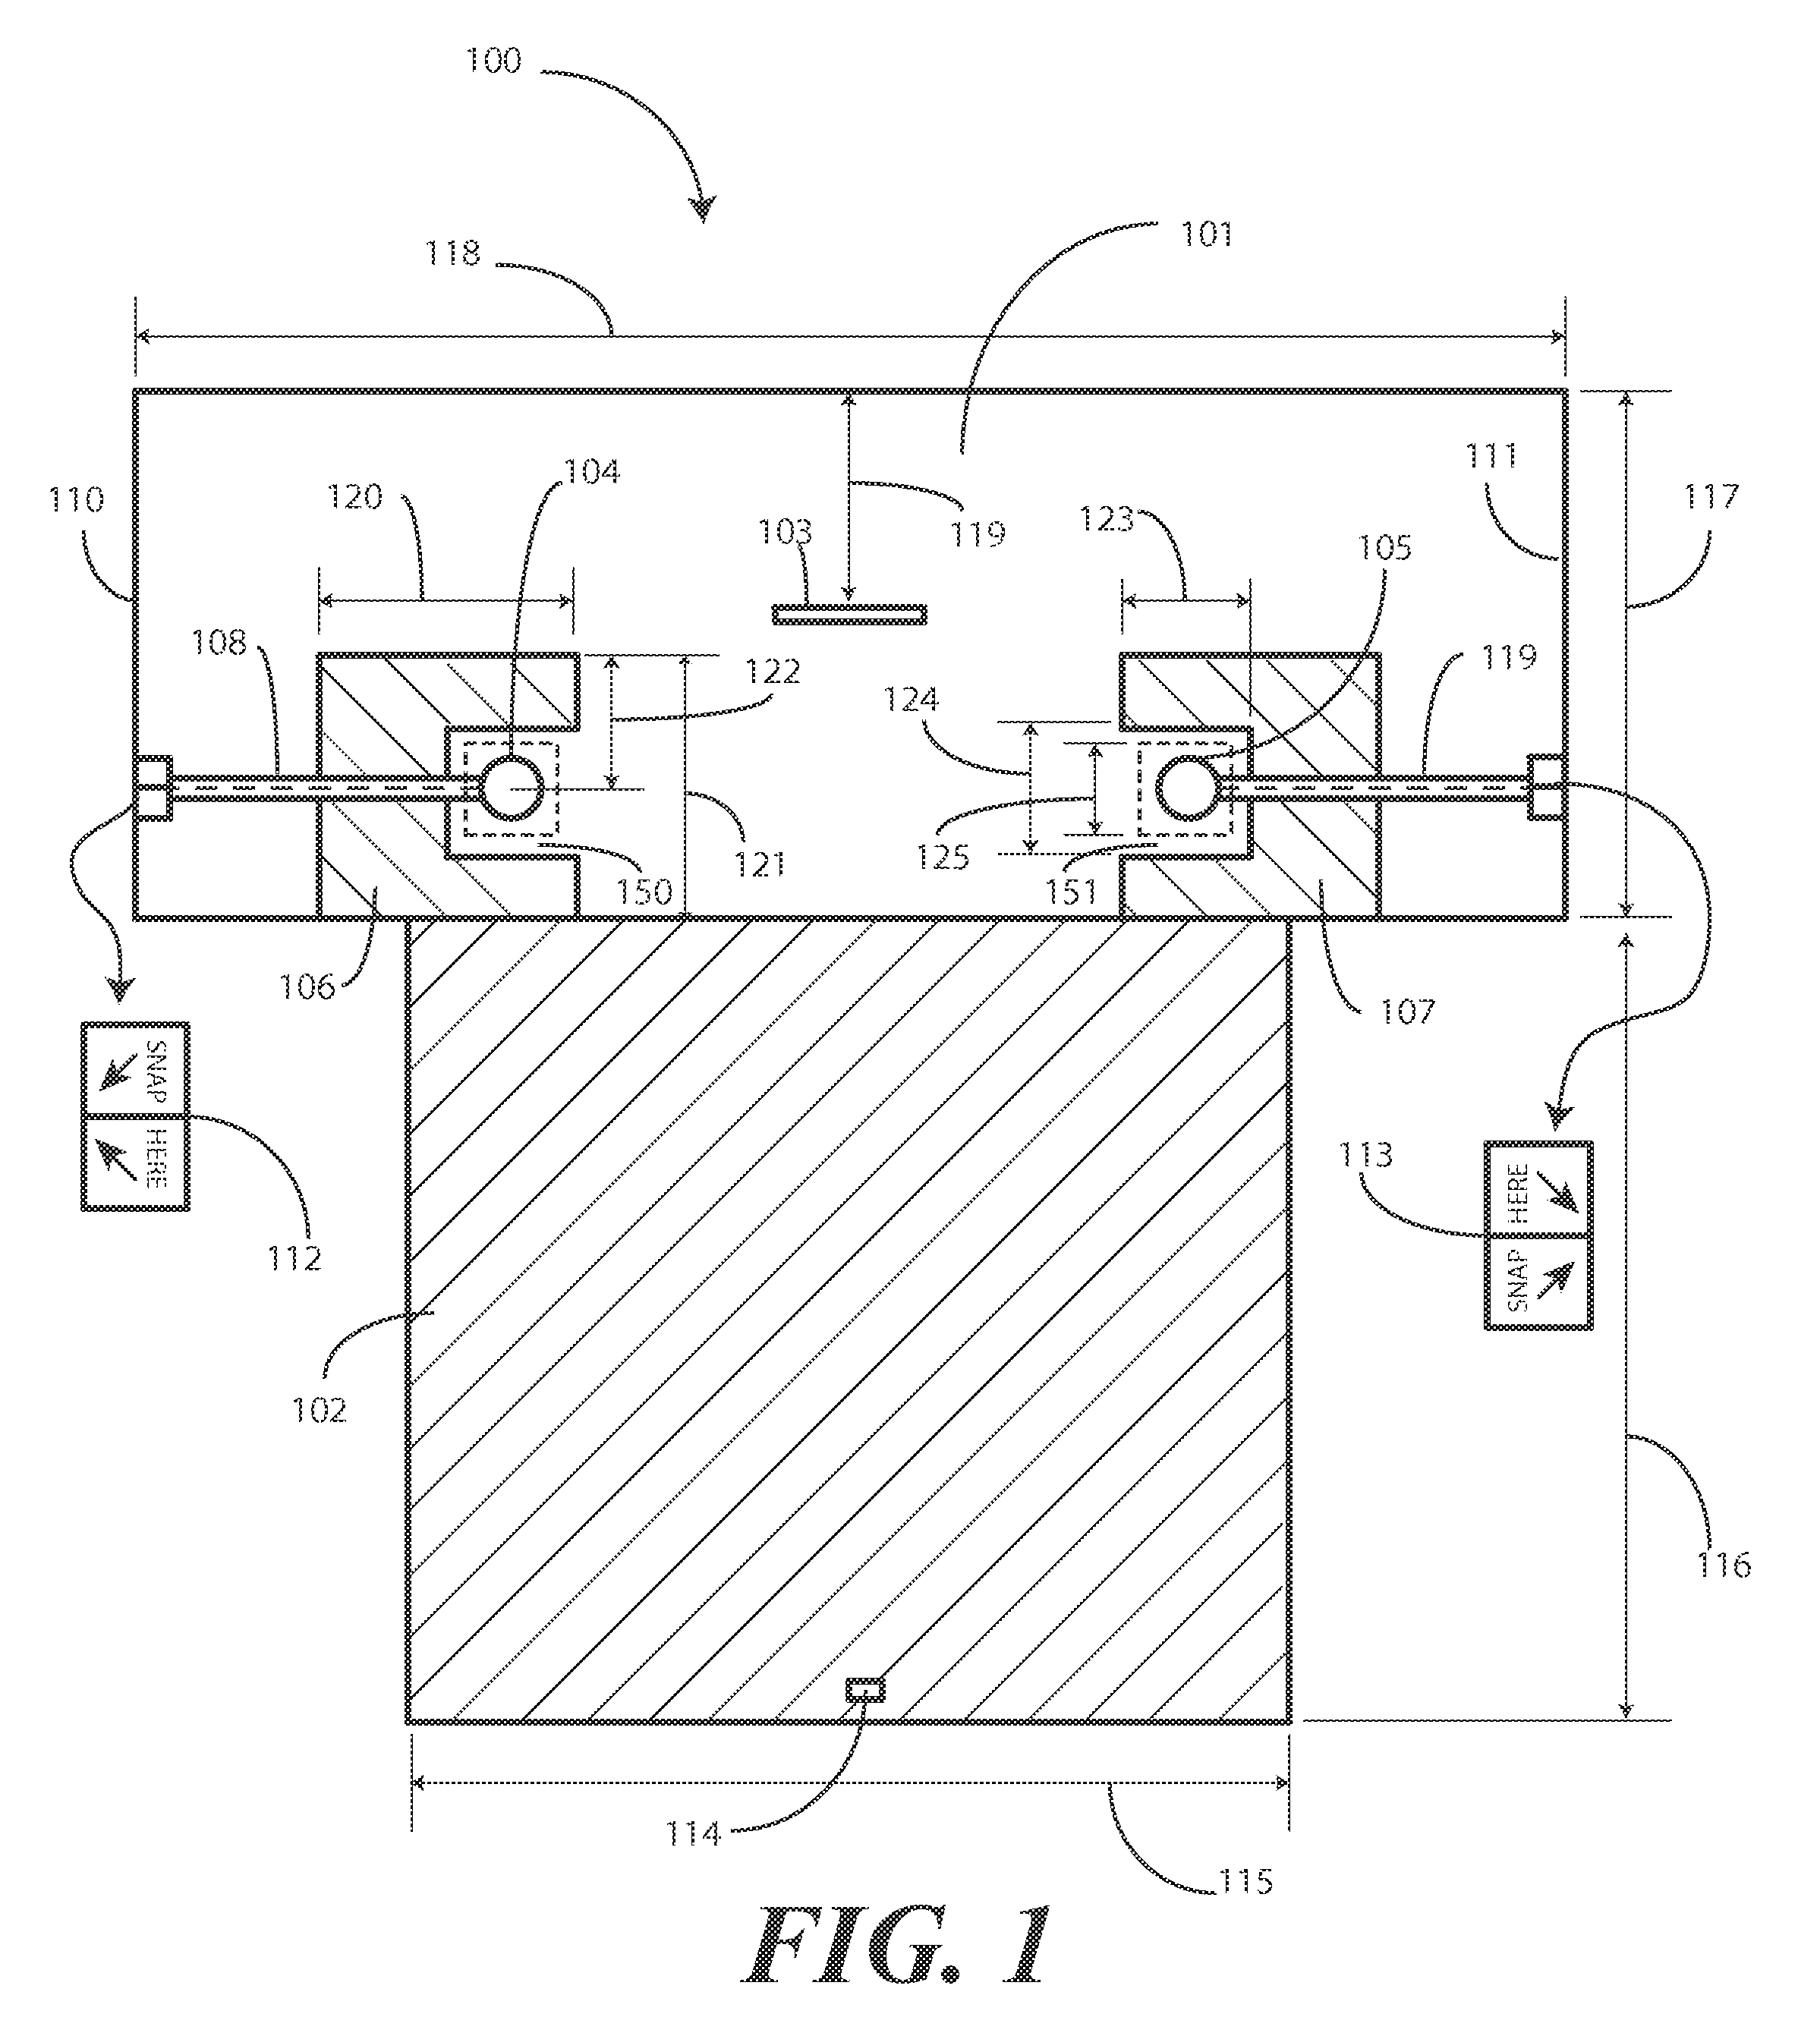 Surgical Drape Configured for Peripherally Inserted Central Catheter Procedures